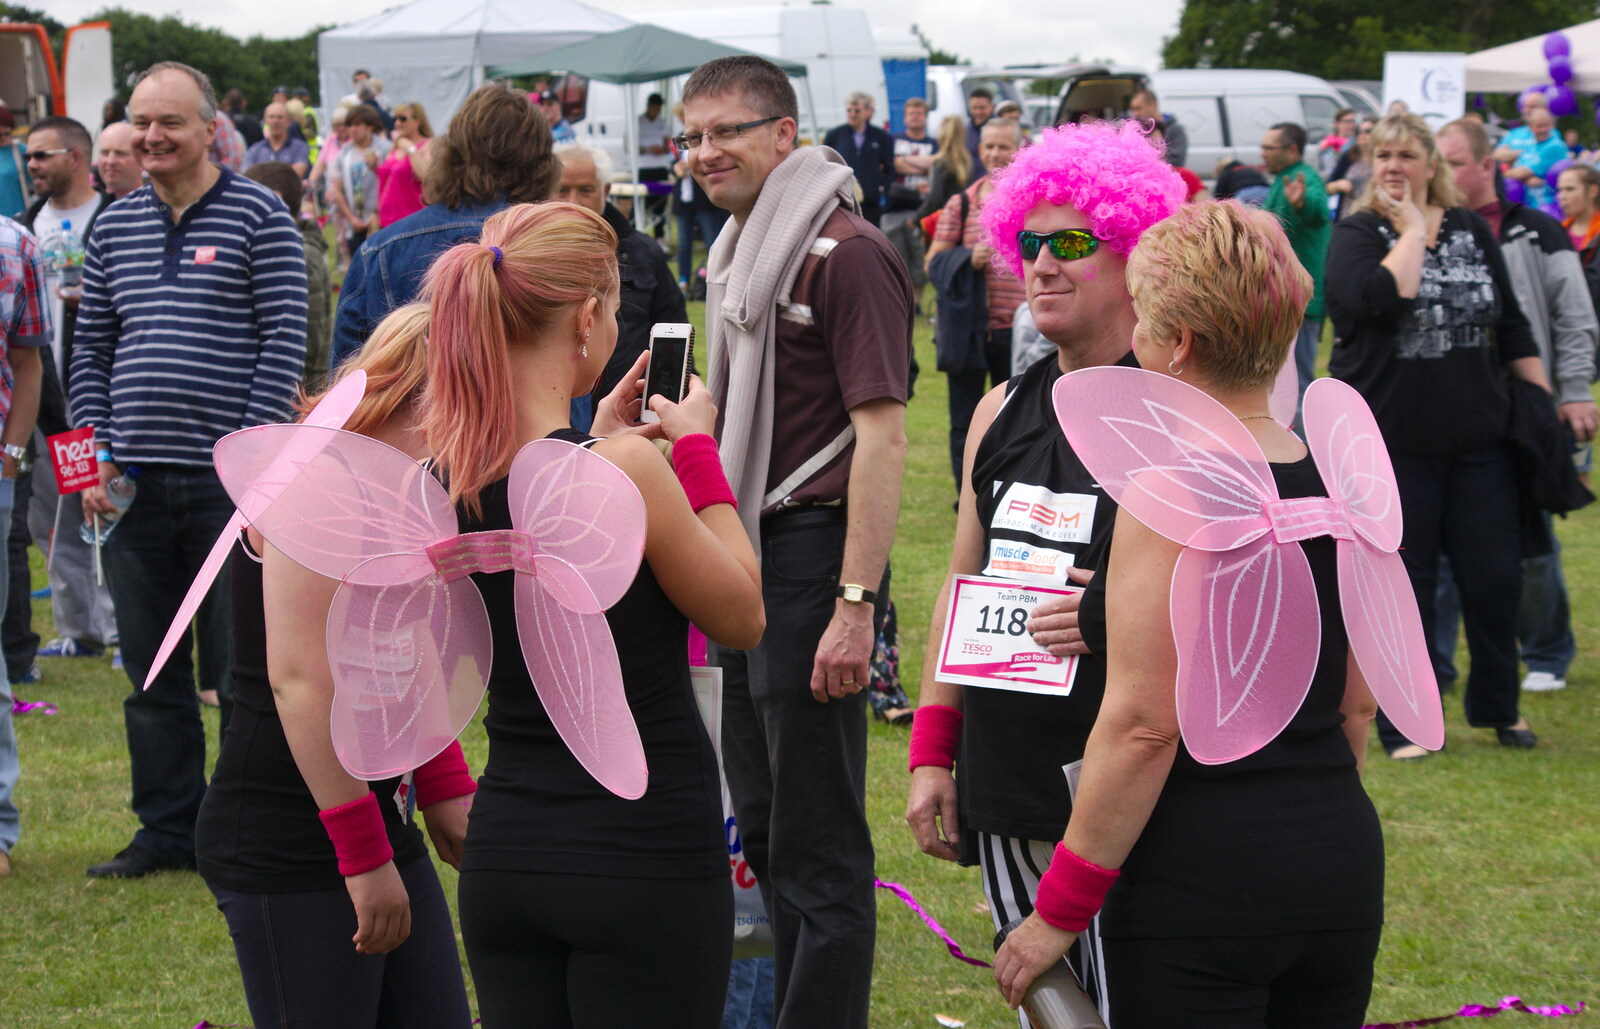 Fairy wings from Isobel's Race For Life, Chantry Park, Ipswich - 11th June 2014